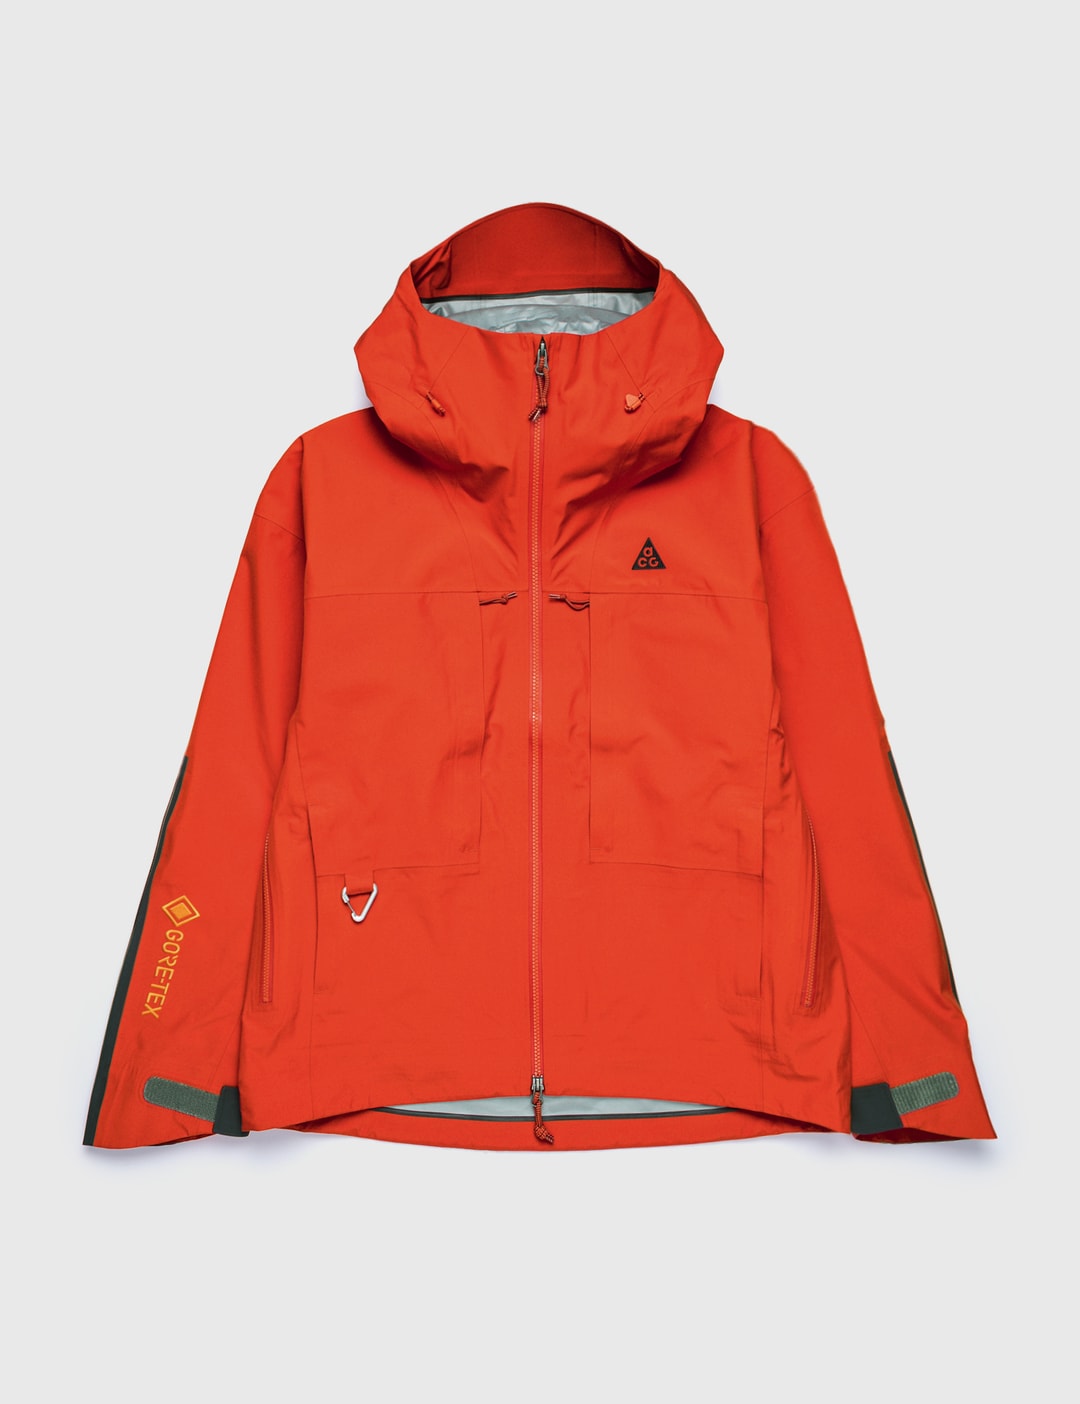 ontploffen Specialiteit ruilen Nike - Nike ACG GORE-TEX Misery Ridge Jacket | HBX - Globally Curated  Fashion and Lifestyle by Hypebeast